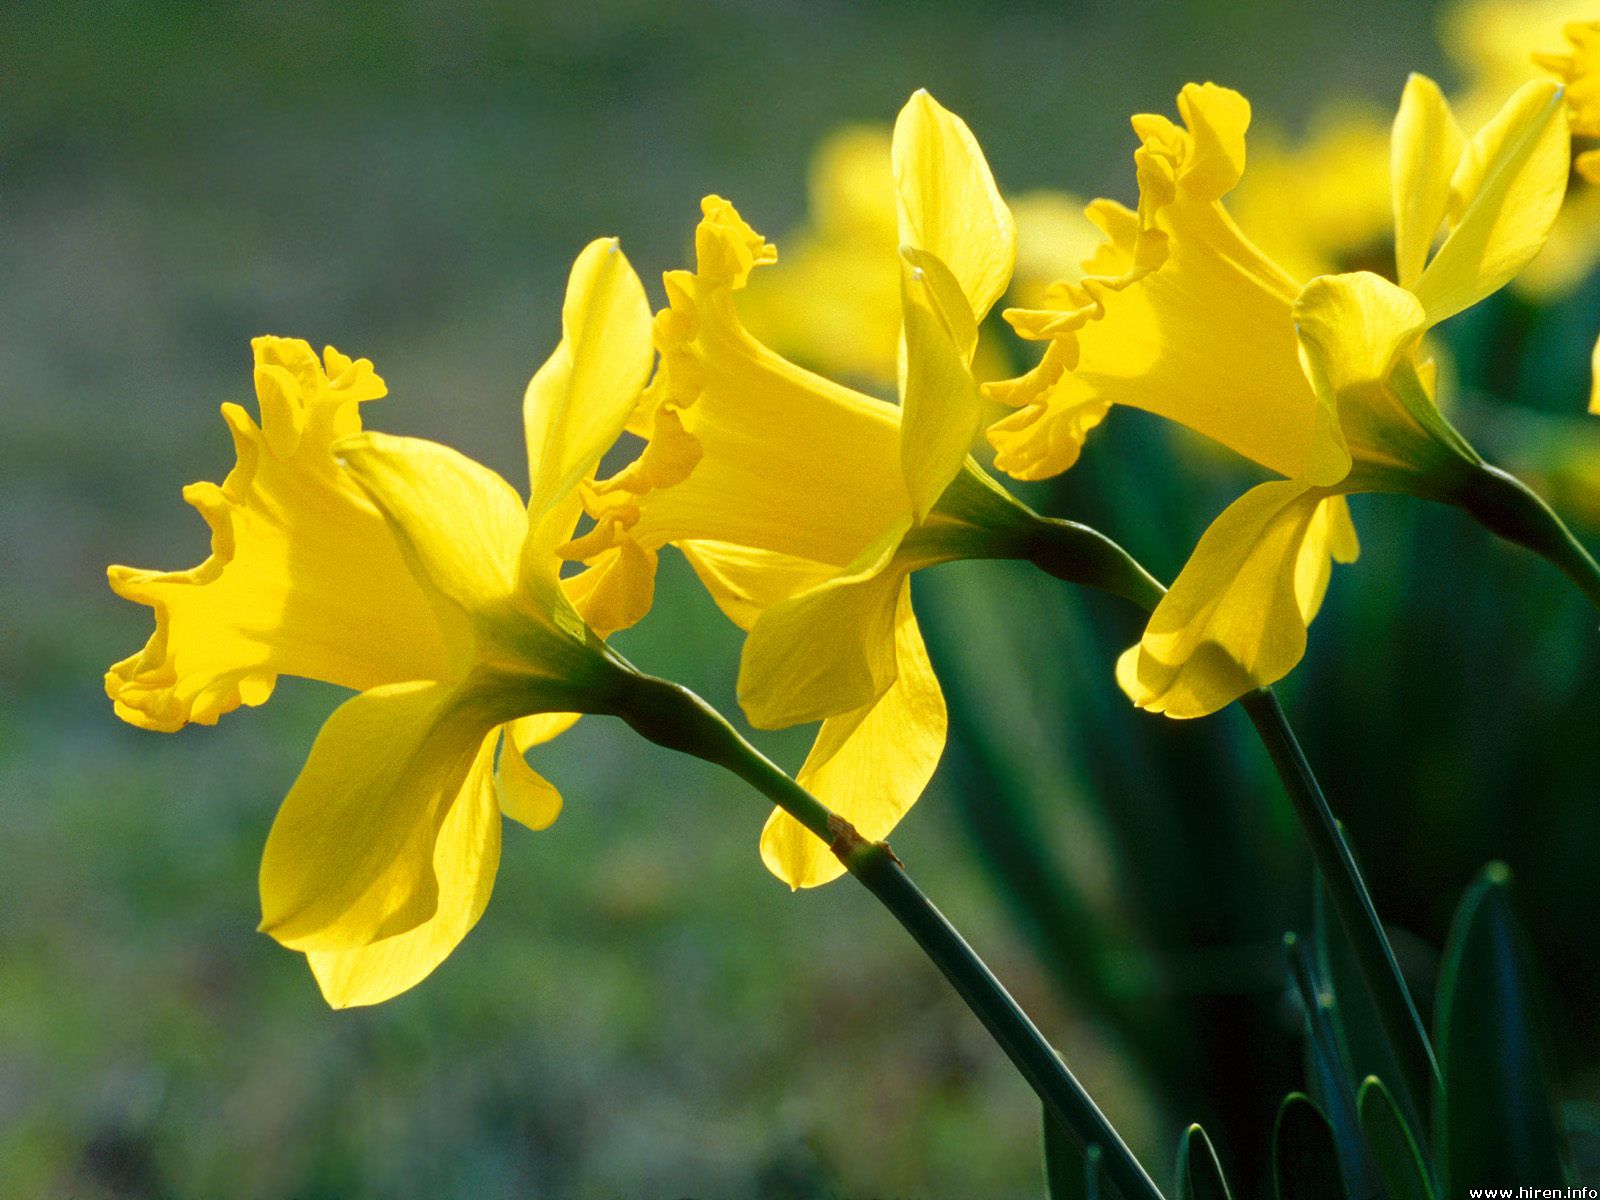 Three Perfect Daffodils HD Wallpaper The Database